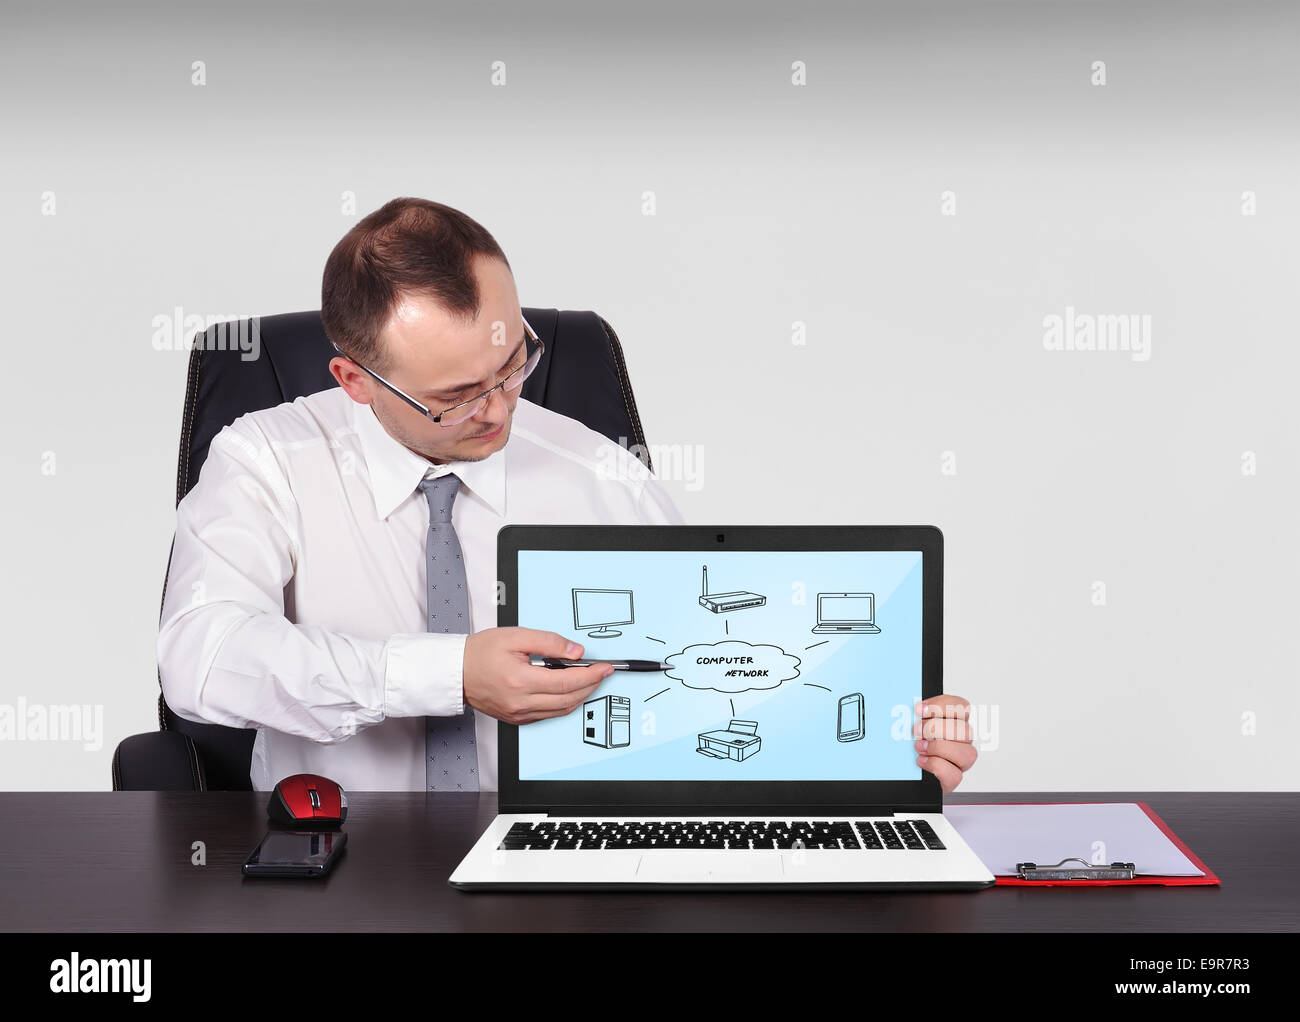 businessman pointing to screen laptop with computer network Stock Photo